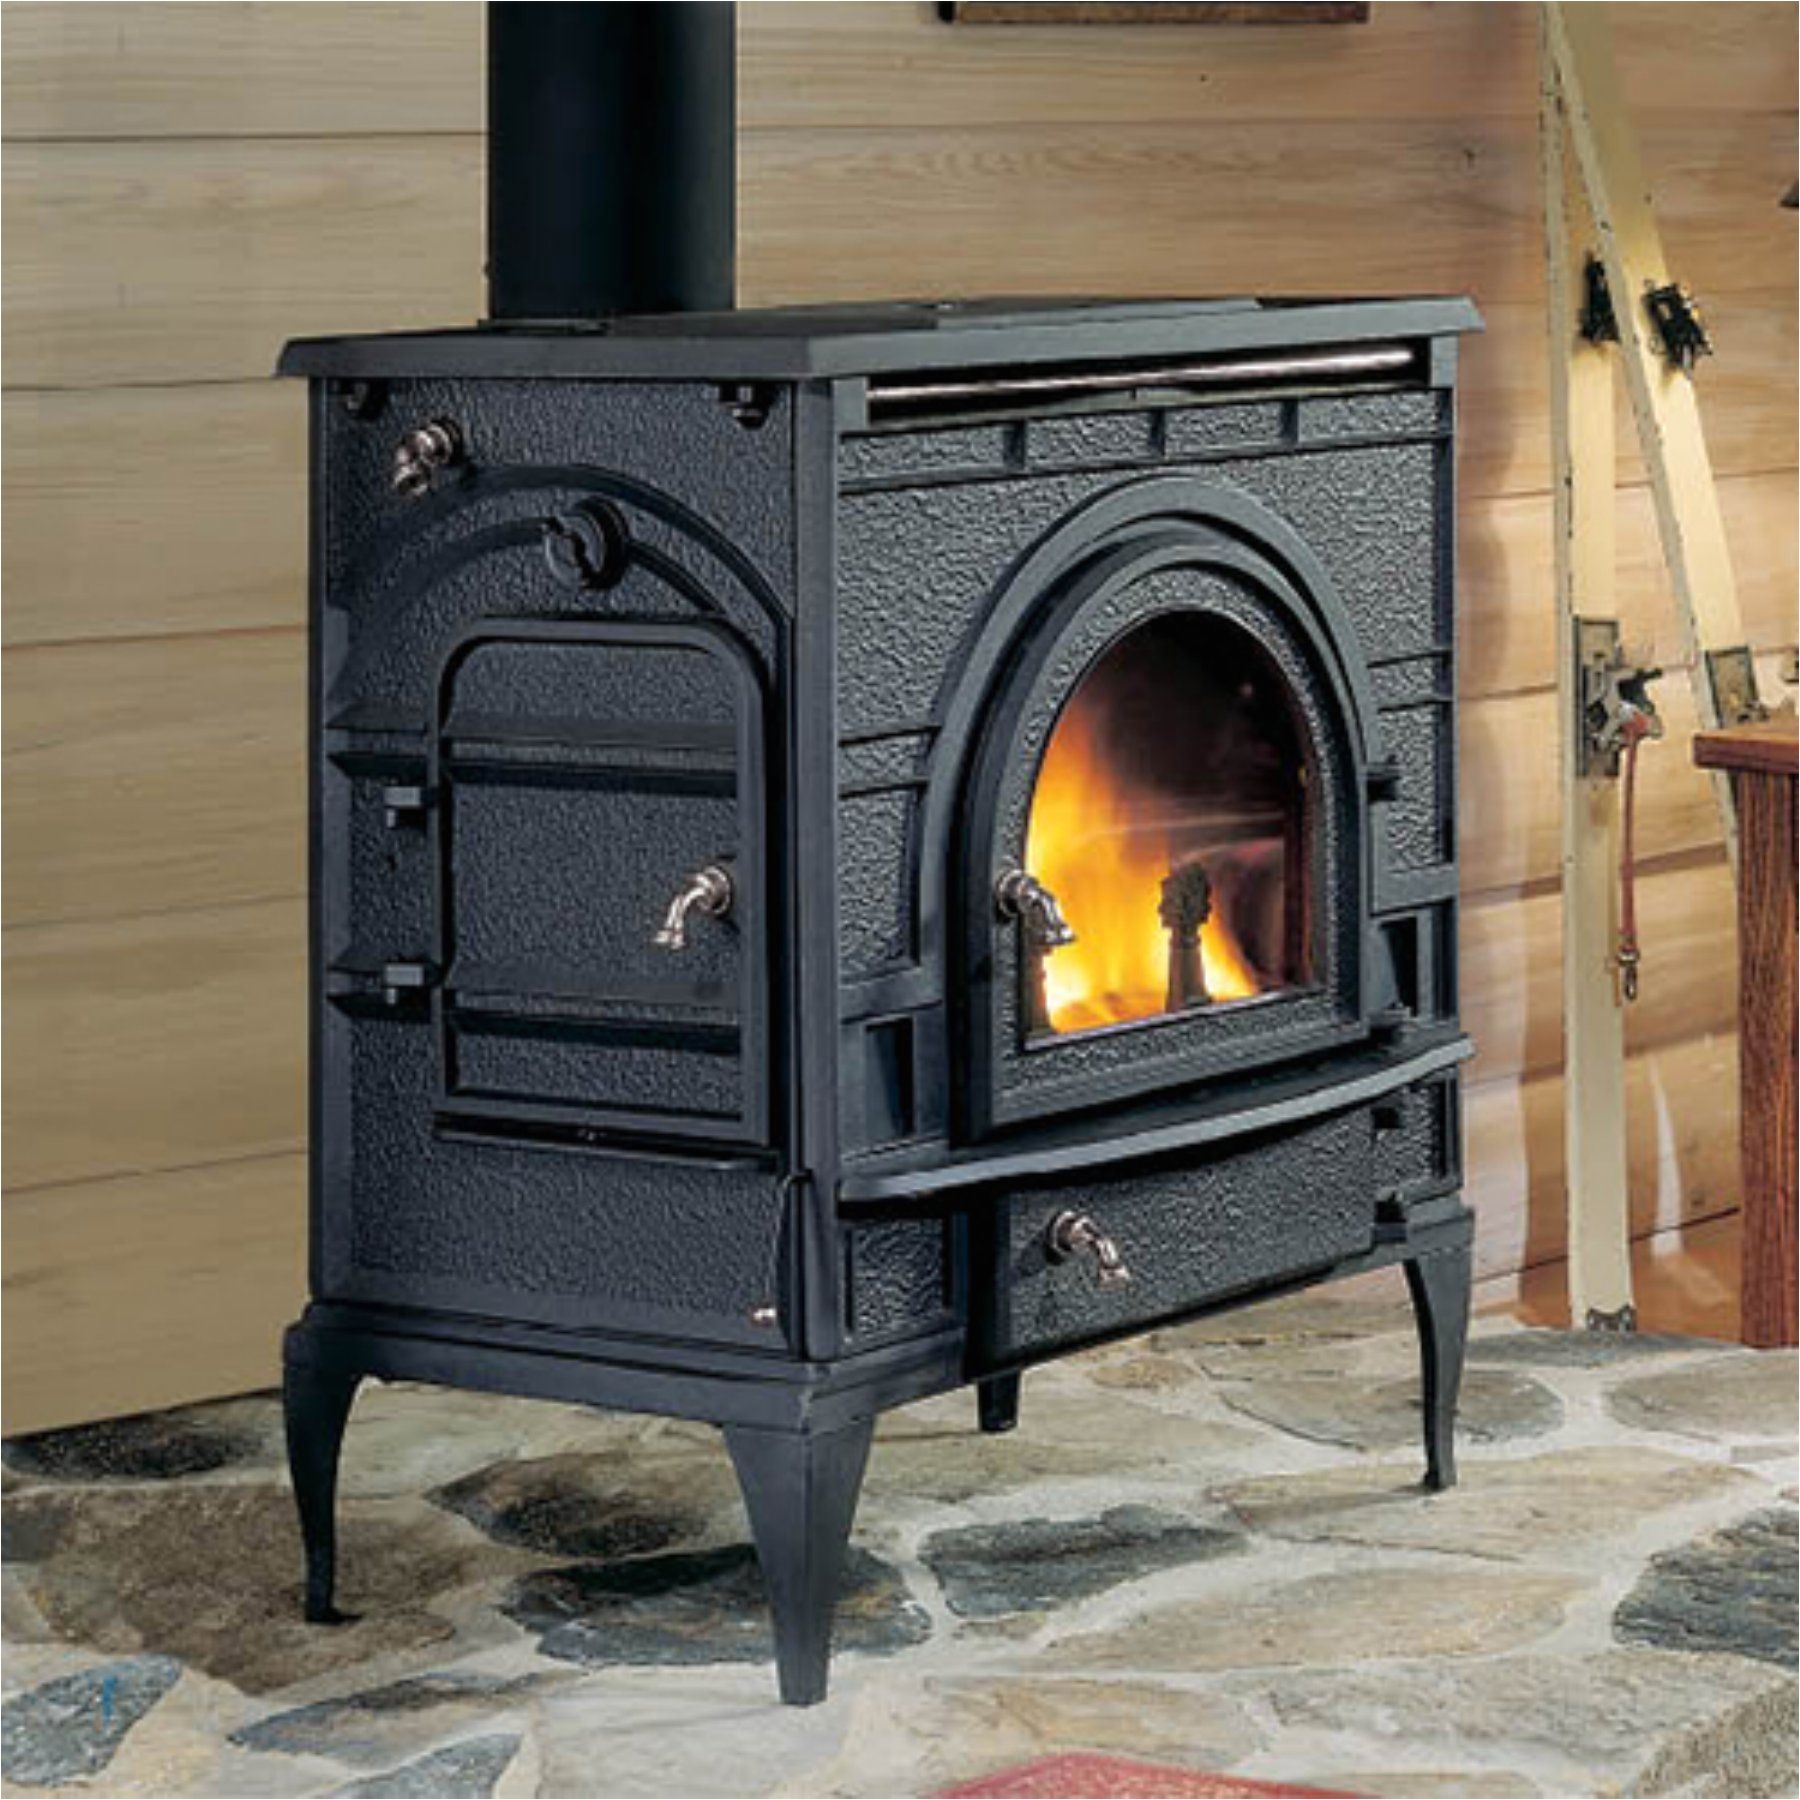 Majestic Fireplace Parts Awesome Wood Burning Fireplace Accessories Near Me Majestic